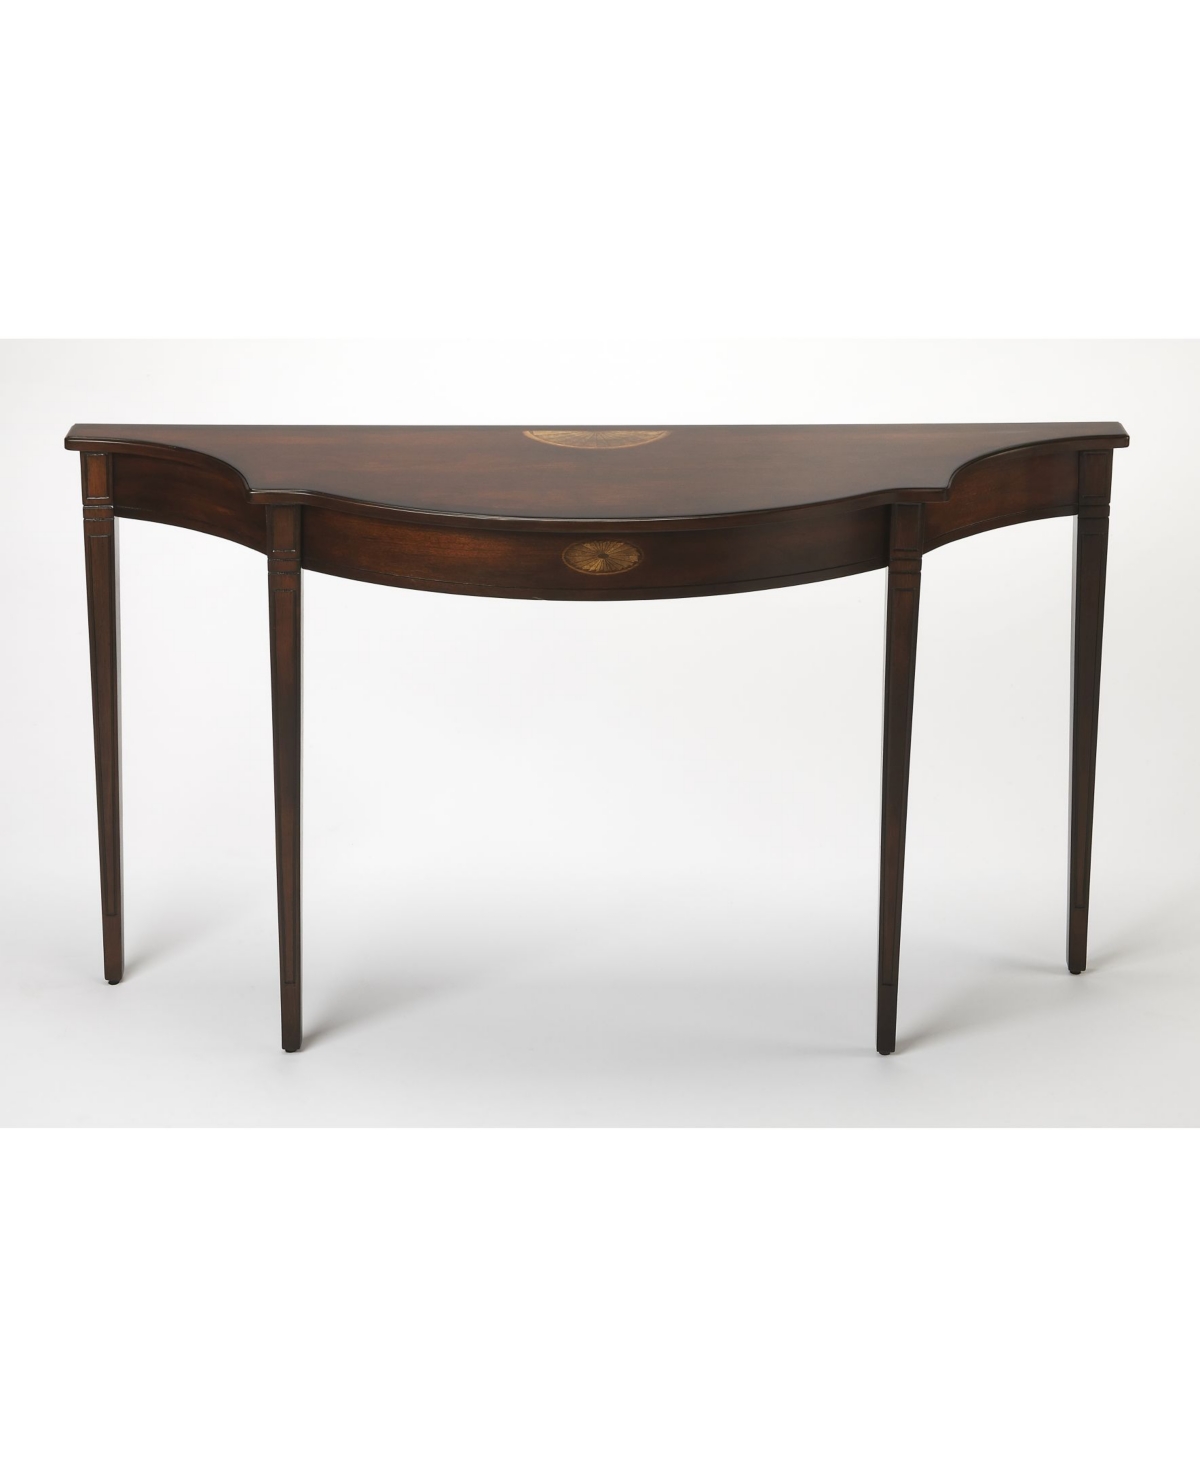 Butler Chester Console Table